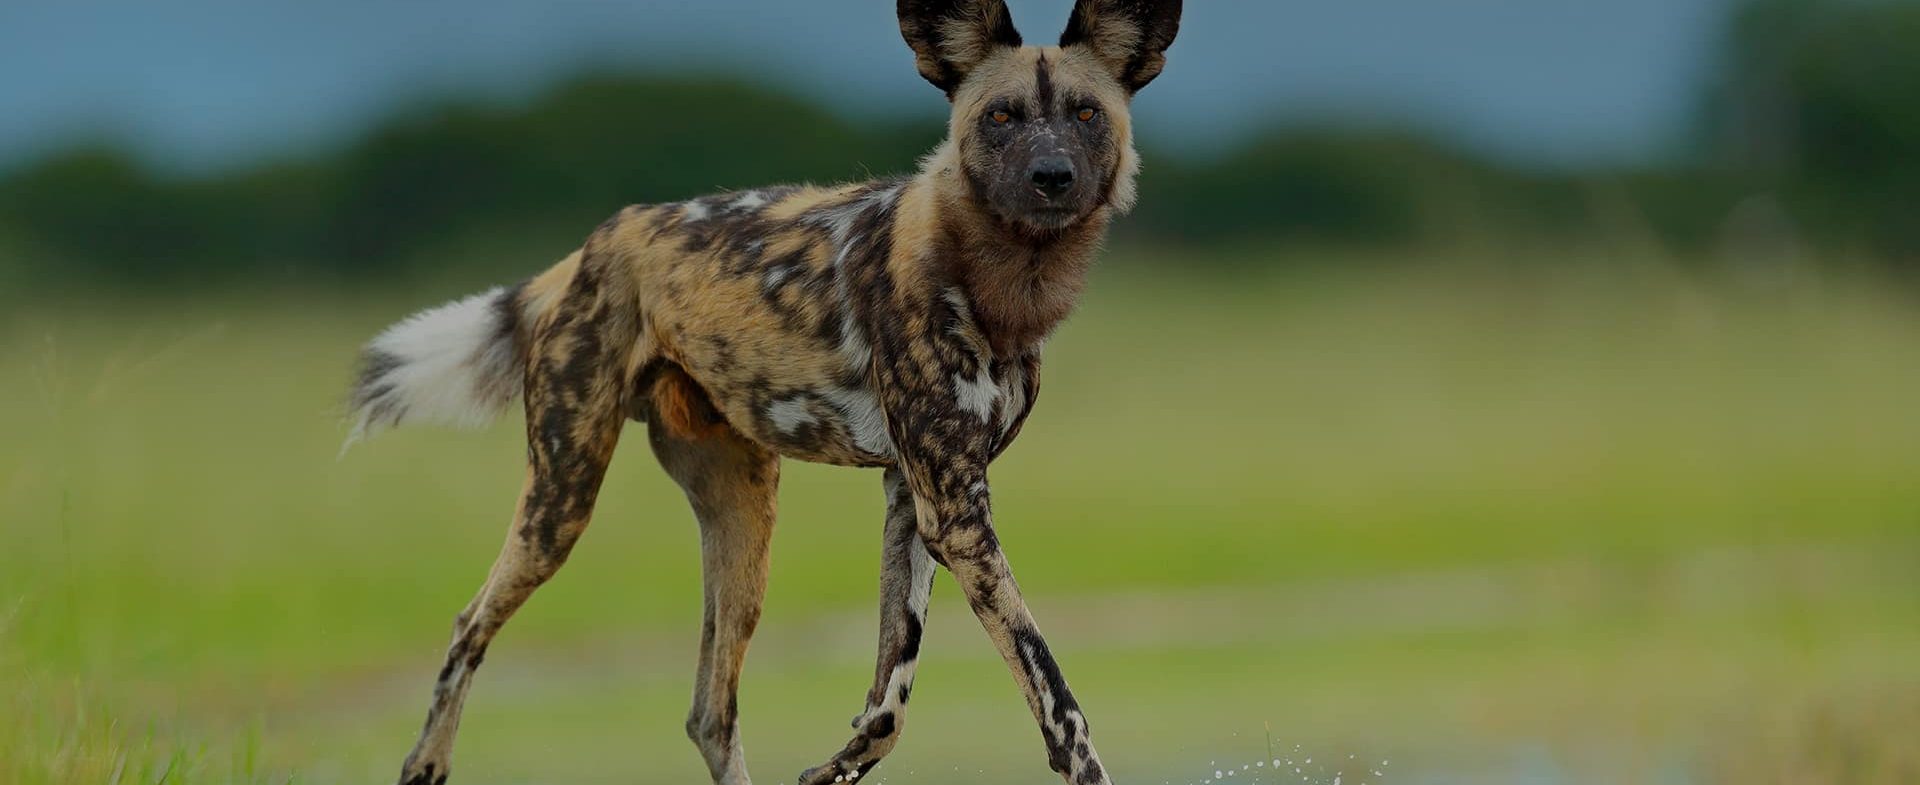 A wild African painted dog with mottled fur in shades of brown, black, and white, standing alert in a lush green savannah. The background features a stormy sky over the Timb